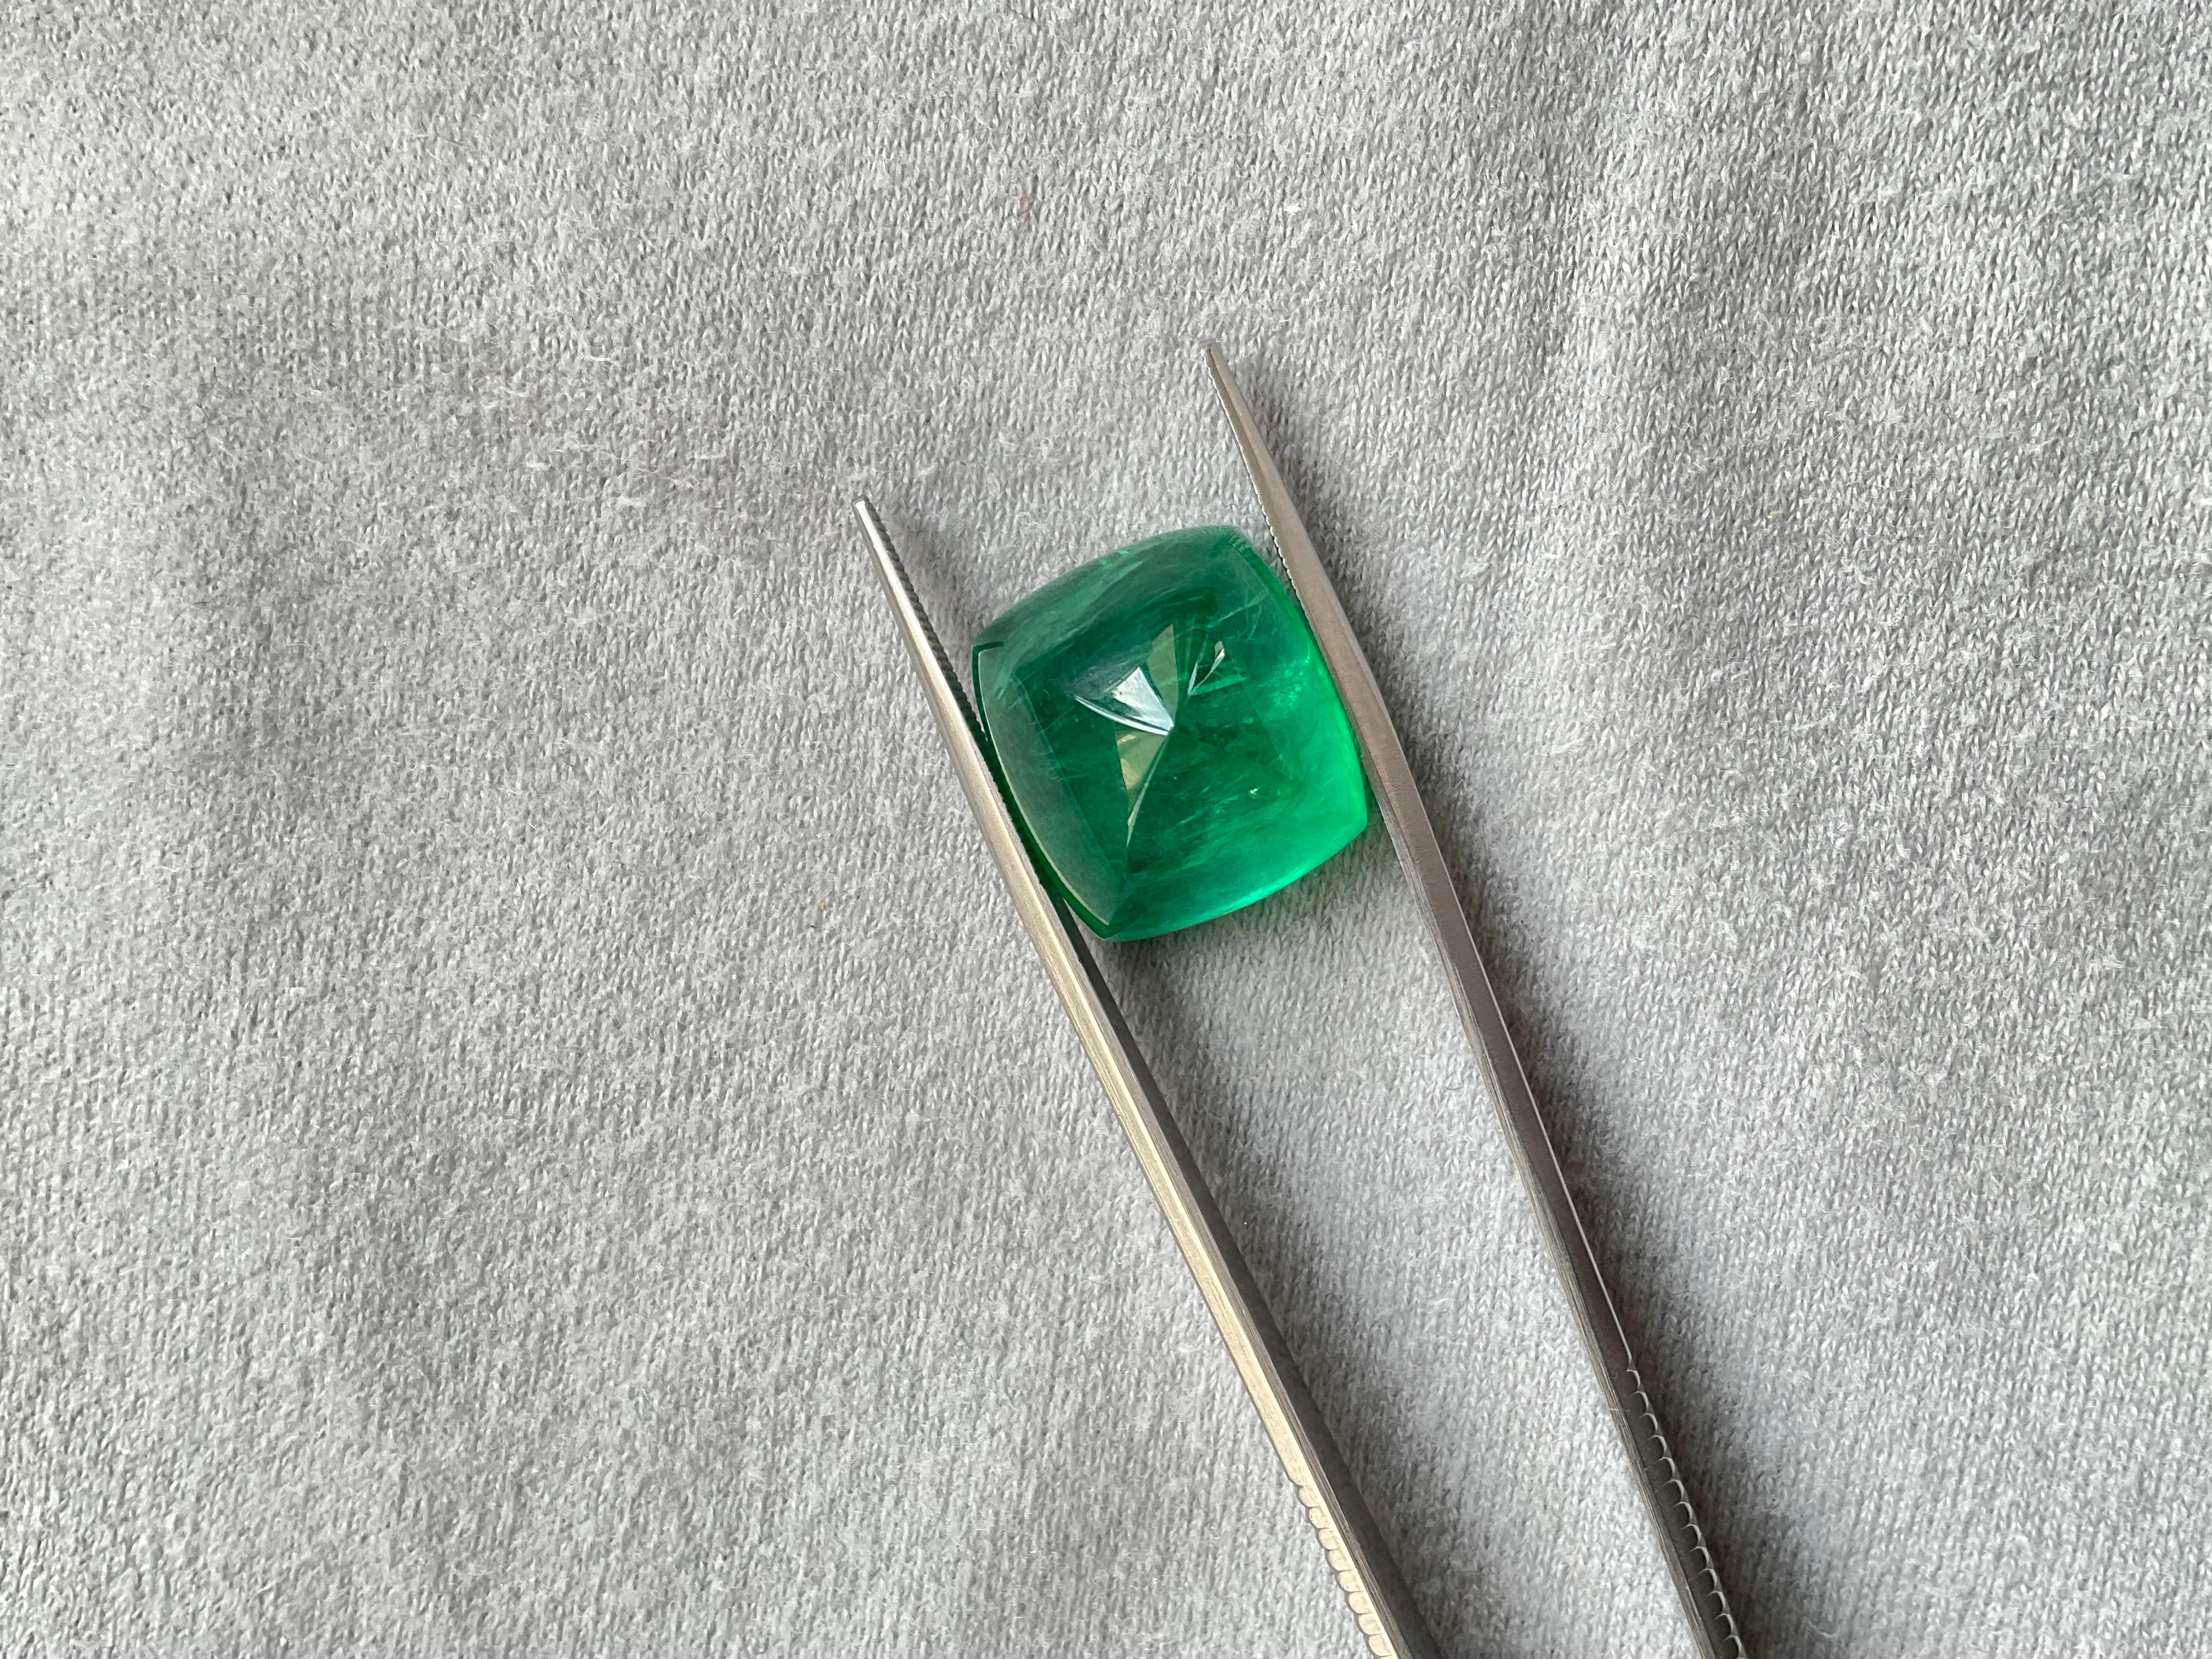 Certified 25.38 Cts Zambian Emerald Sugarloaf Cabochon Top Quality Natural Gem For Sale 5